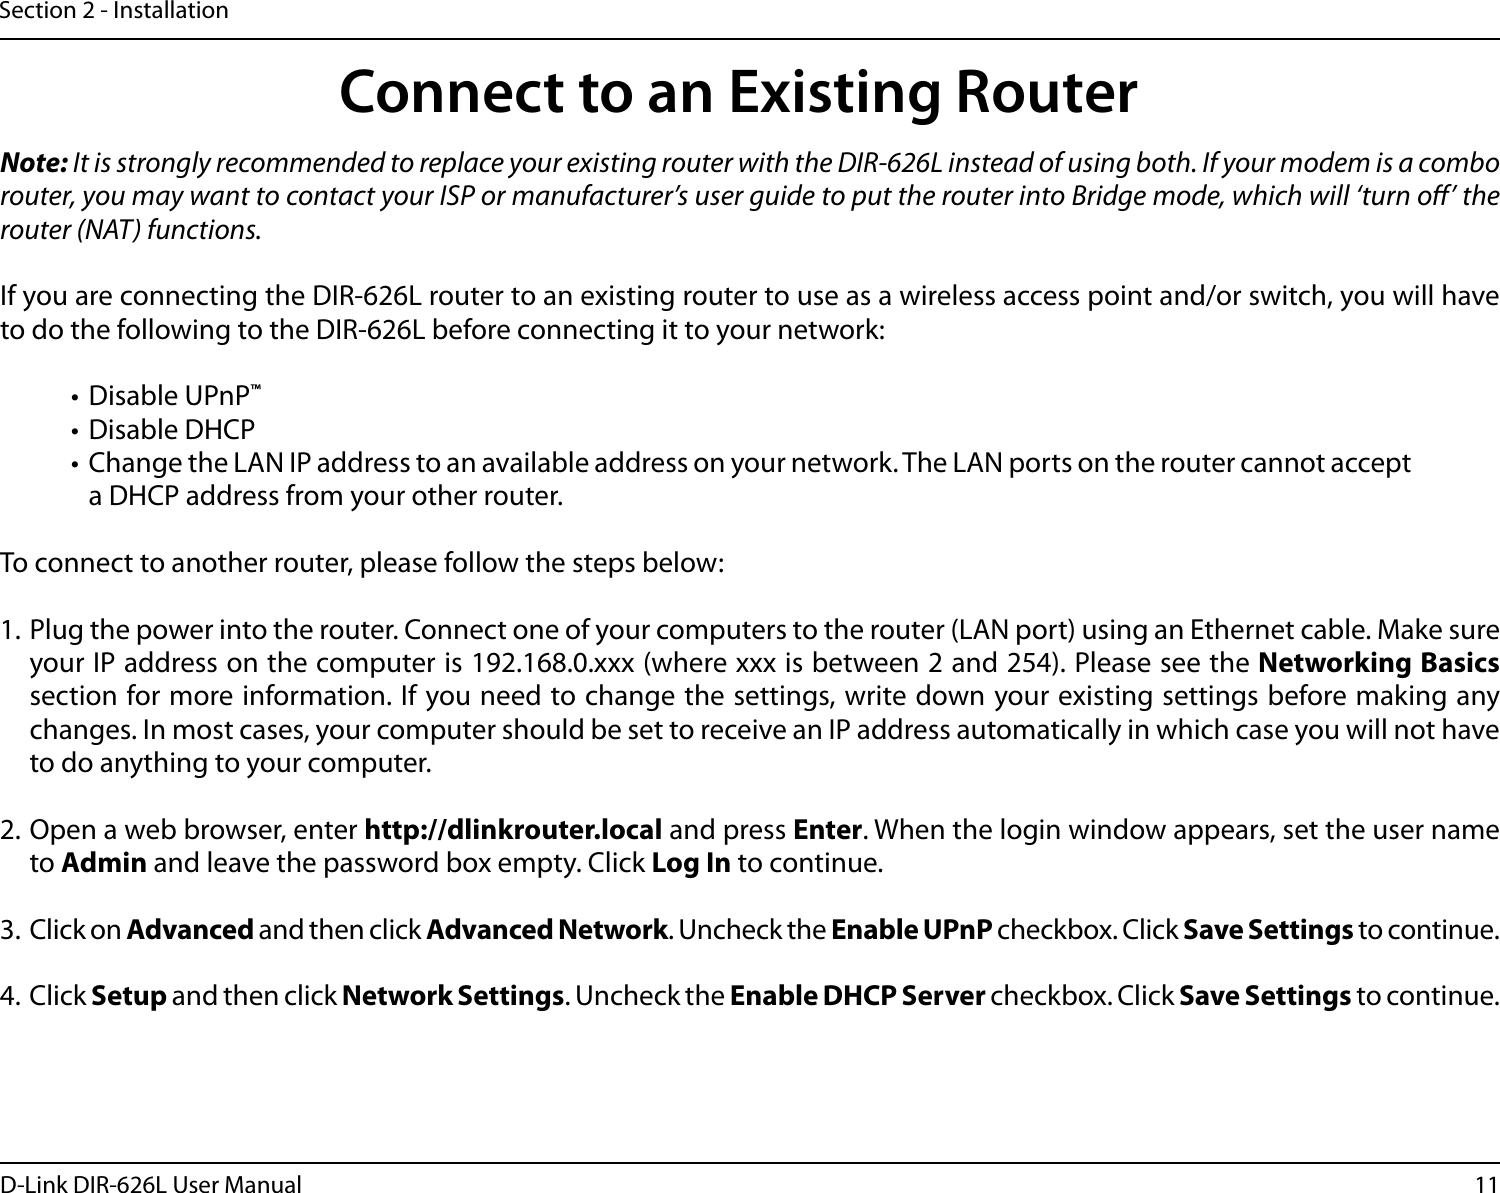 11D-Link DIR-626L User ManualSection 2 - InstallationNote: It is strongly recommended to replace your existing router with the DIR-626L instead of using both. If your modem is a combo router, you may want to contact your ISP or manufacturer’s user guide to put the router into Bridge mode, which will ‘turn o’ the router (NAT) functions. If you are connecting the DIR-626L router to an existing router to use as a wireless access point and/or switch, you will have to do the following to the DIR-626L before connecting it to your network:• Disable UPnP™• Disable DHCP• Change the LAN IP address to an available address on your network. The LAN ports on the router cannot accept a DHCP address from your other router.To connect to another router, please follow the steps below:1. Plug the power into the router. Connect one of your computers to the router (LAN port) using an Ethernet cable. Make sure your IP address on the computer is 192.168.0.xxx (where xxx is between 2 and 254). Please see the Networking Basics section for more information. If you need to change the settings, write down your existing settings before making any changes. In most cases, your computer should be set to receive an IP address automatically in which case you will not have to do anything to your computer.2. Open a web browser, enter http://dlinkrouter.local and press Enter. When the login window appears, set the user name to Admin and leave the password box empty. Click Log In to continue.3. Click on Advanced and then click Advanced Network. Uncheck the Enable UPnP checkbox. Click Save Settings to continue. 4. Click Setup and then click Network Settings. Uncheck the Enable DHCP Server checkbox. Click Save Settings to continue.Connect to an Existing Router